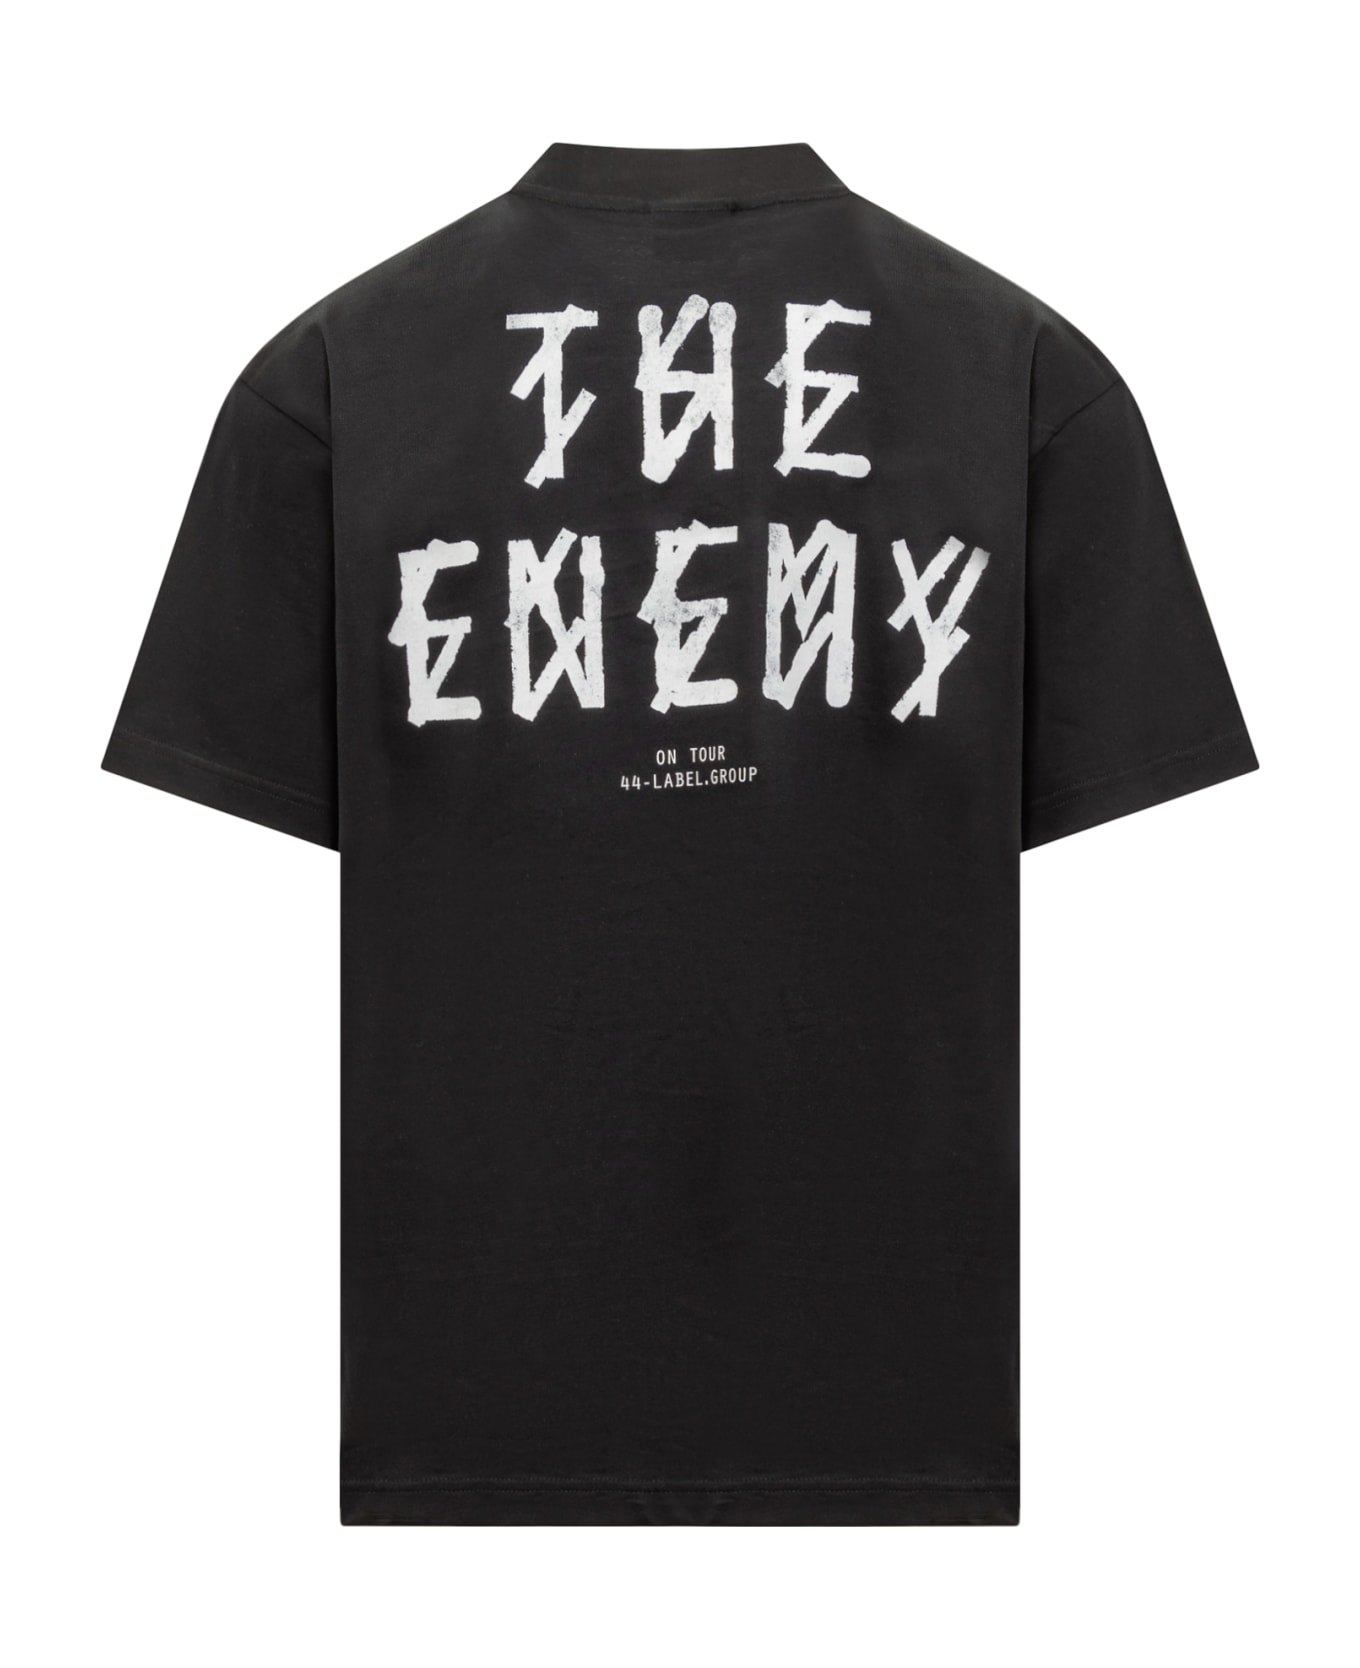 44 Label Group The Enemy T-shirt - BLACK シャツ